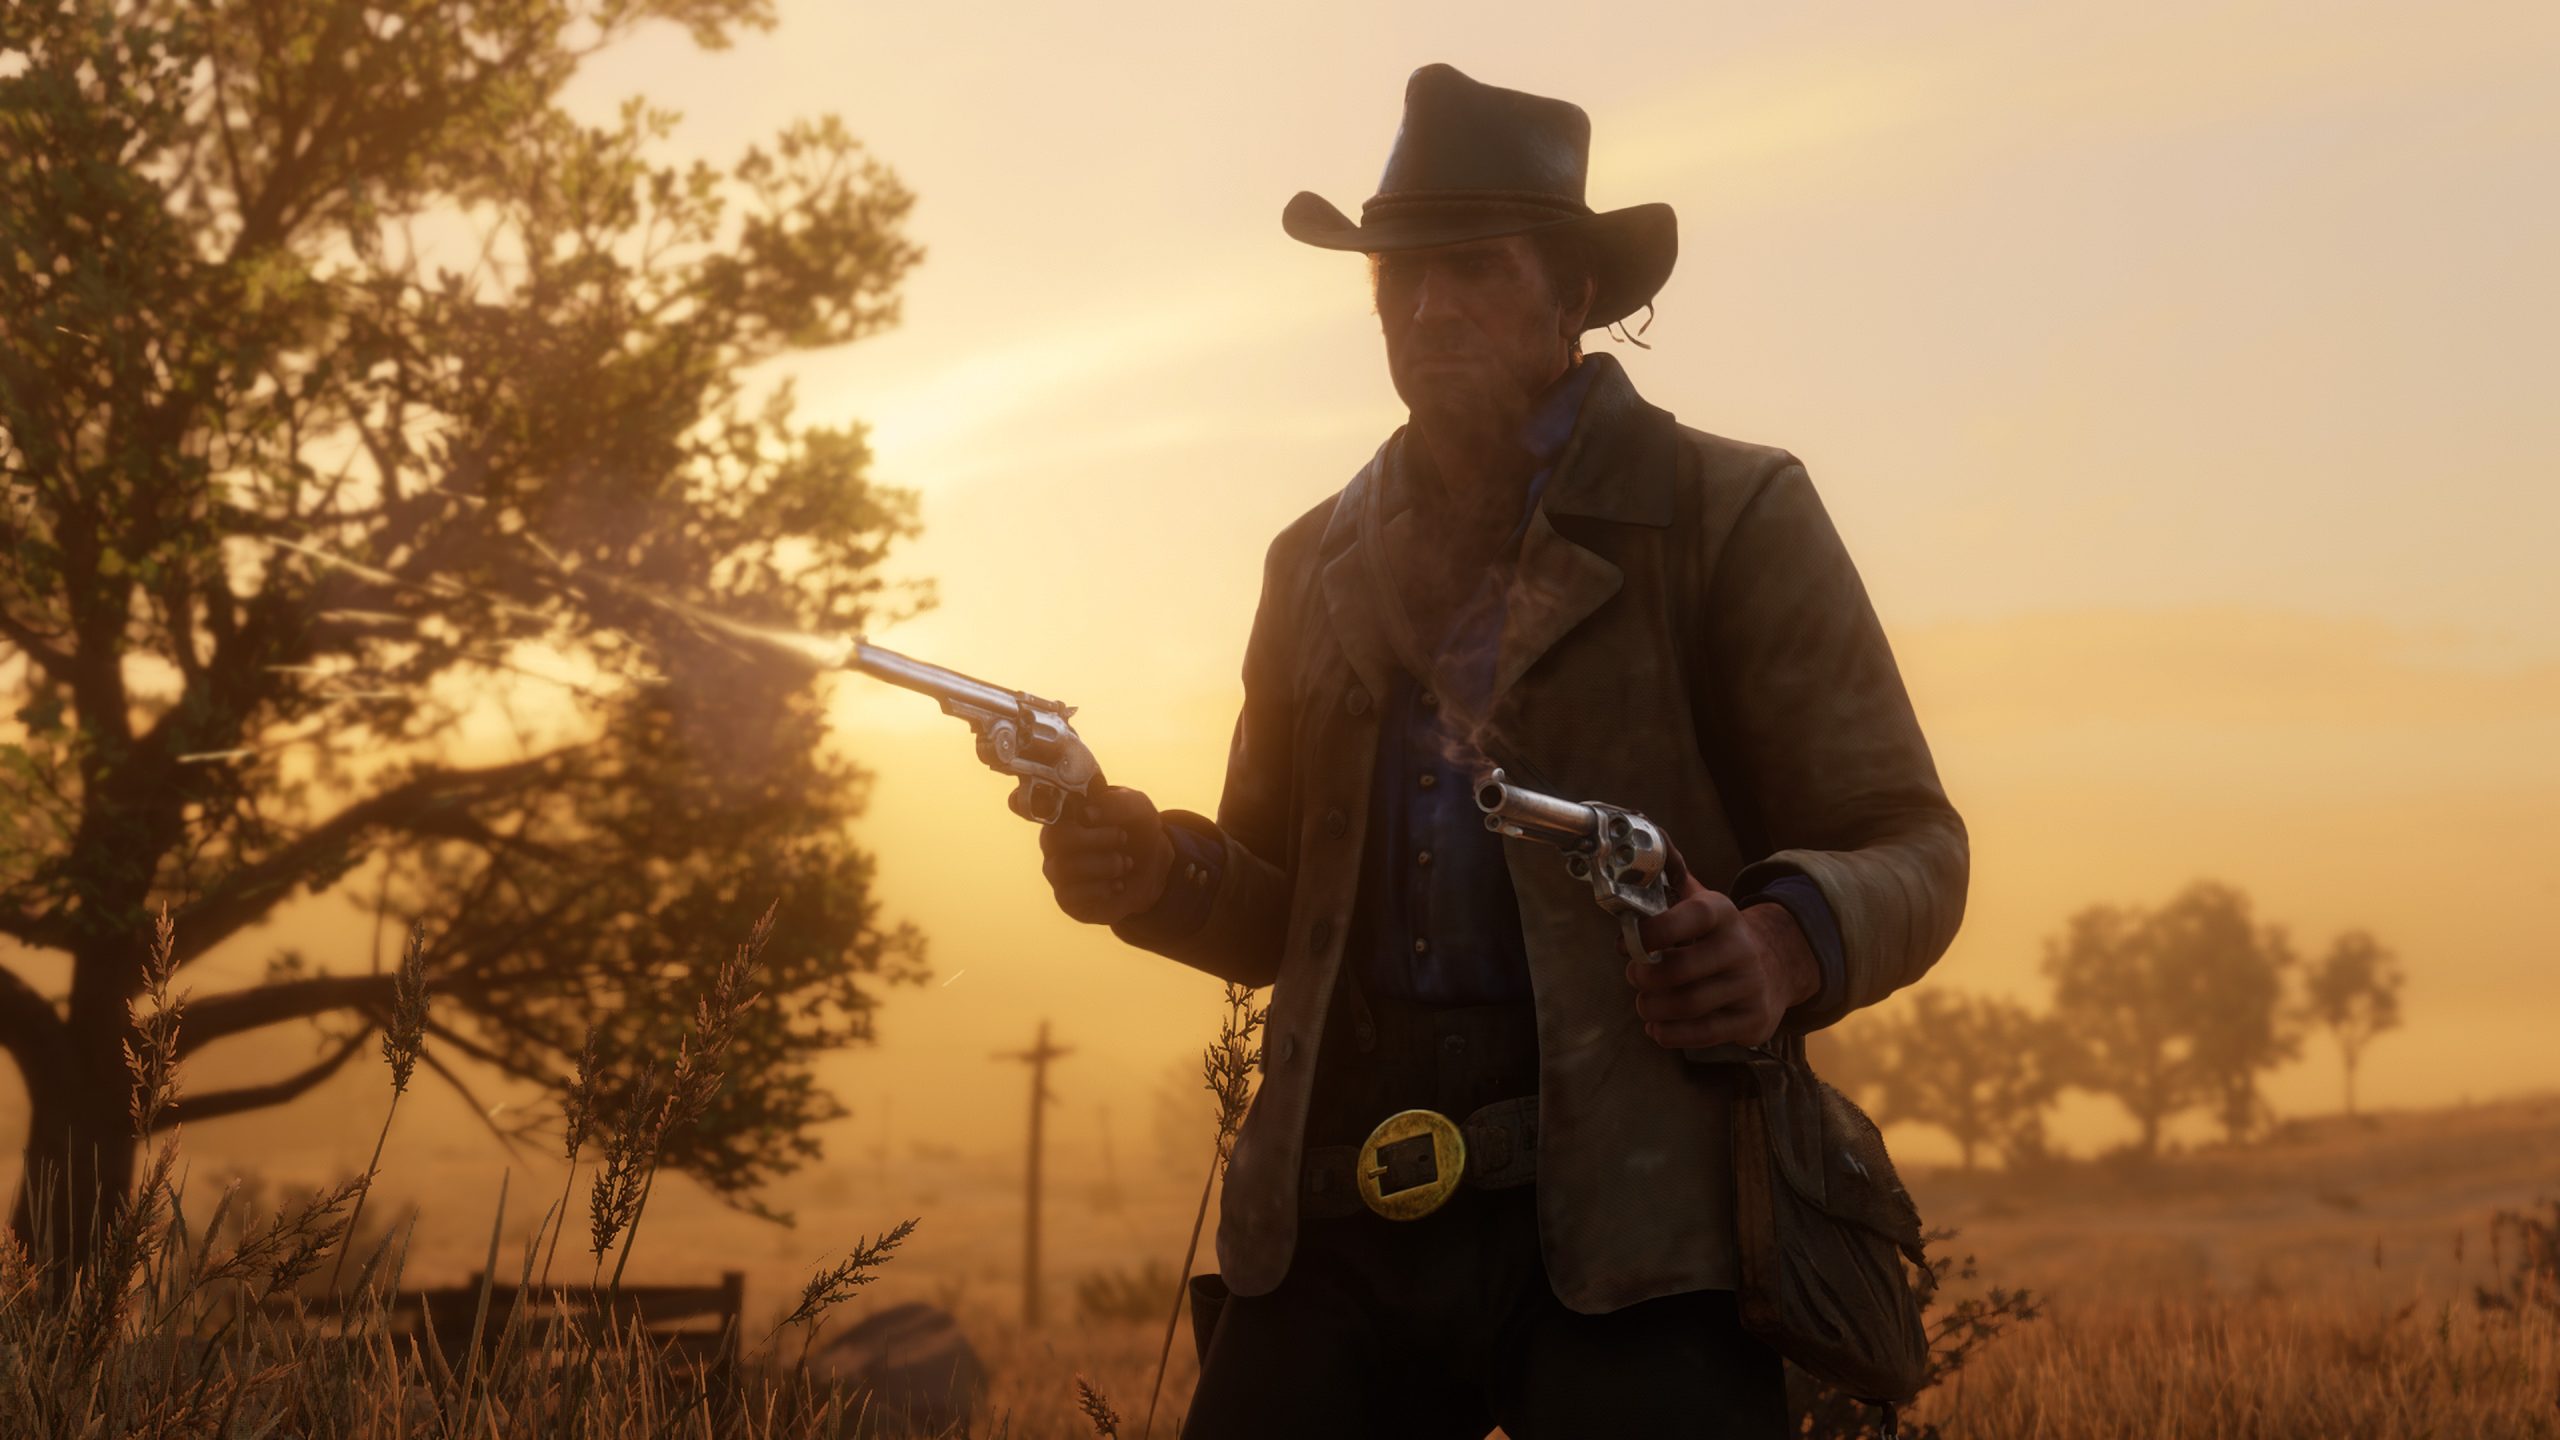 FAN EXPO Denver on X: Be loyal to what matters. What matters is our newest  guests: Rob Wiethoff (John Marston) and Roger Clark (Arthur Morgan). Meet  them and other gaming greats like